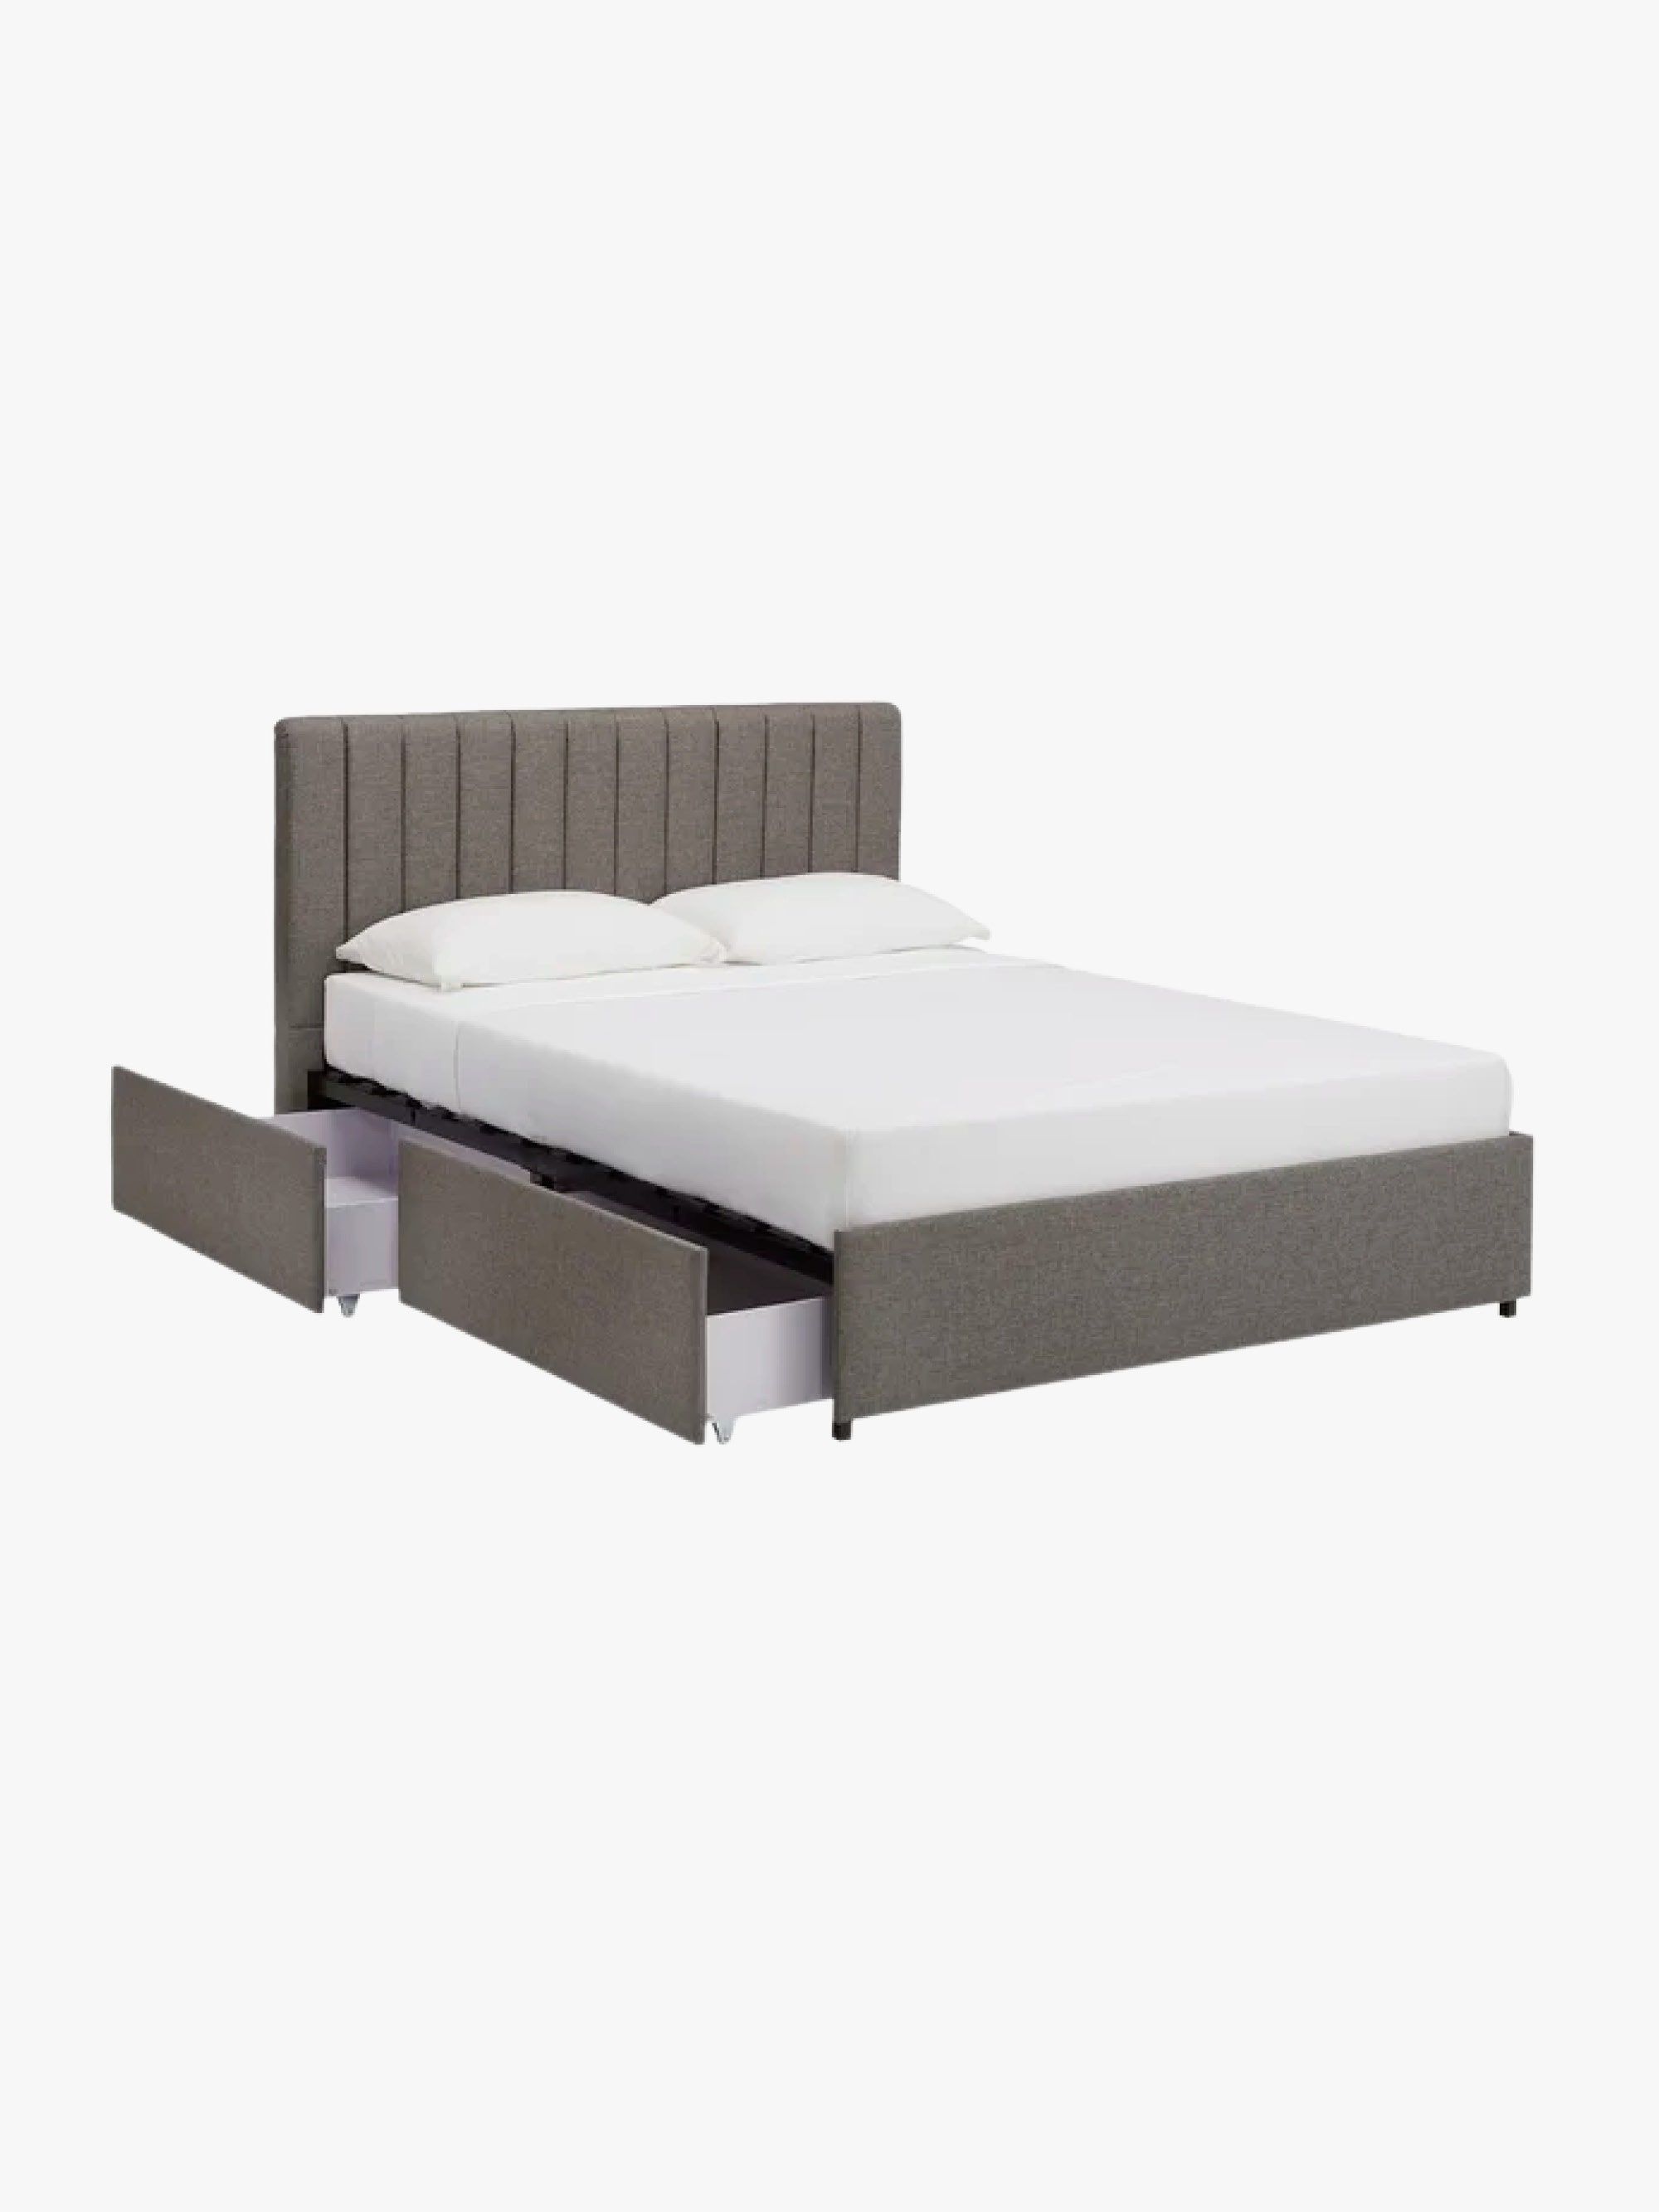 <p>Here’s another simple and sleek upholstered pick we love. The low-profile bed features a neutral grey linen channel headboard, as well as four storage drawers where you can store everything from bulky bedding and pillows to off-season clothing and shoes.</p> <ul> <li><strong>Sizes available:</strong> Full, queen, and Eastern king beds</li> <li><strong>Colors available:</strong> Gray</li> <li><strong>Storage type:</strong> Four pullout storage drawers</li> <li><strong>Materials:</strong> MDF, linen upholstery</li> <li><strong>Weight capacity:</strong> 500 pounds</li> </ul> $490, Wayfair. <a href="https://www.wayfair.com/Mercury-Row%C2%AE--Cletus-Upholstered-Low-Profile-Storage-Platform-Bed-X114357361-L12-K~W003246250.html">Get it now!</a><p>Sign up for our newsletter to get the latest in design, decorating, celebrity style, shopping, and more.</p><a href="https://www.architecturaldigest.com/newsletter/subscribe?sourceCode=msnsend">Sign Up Now</a>